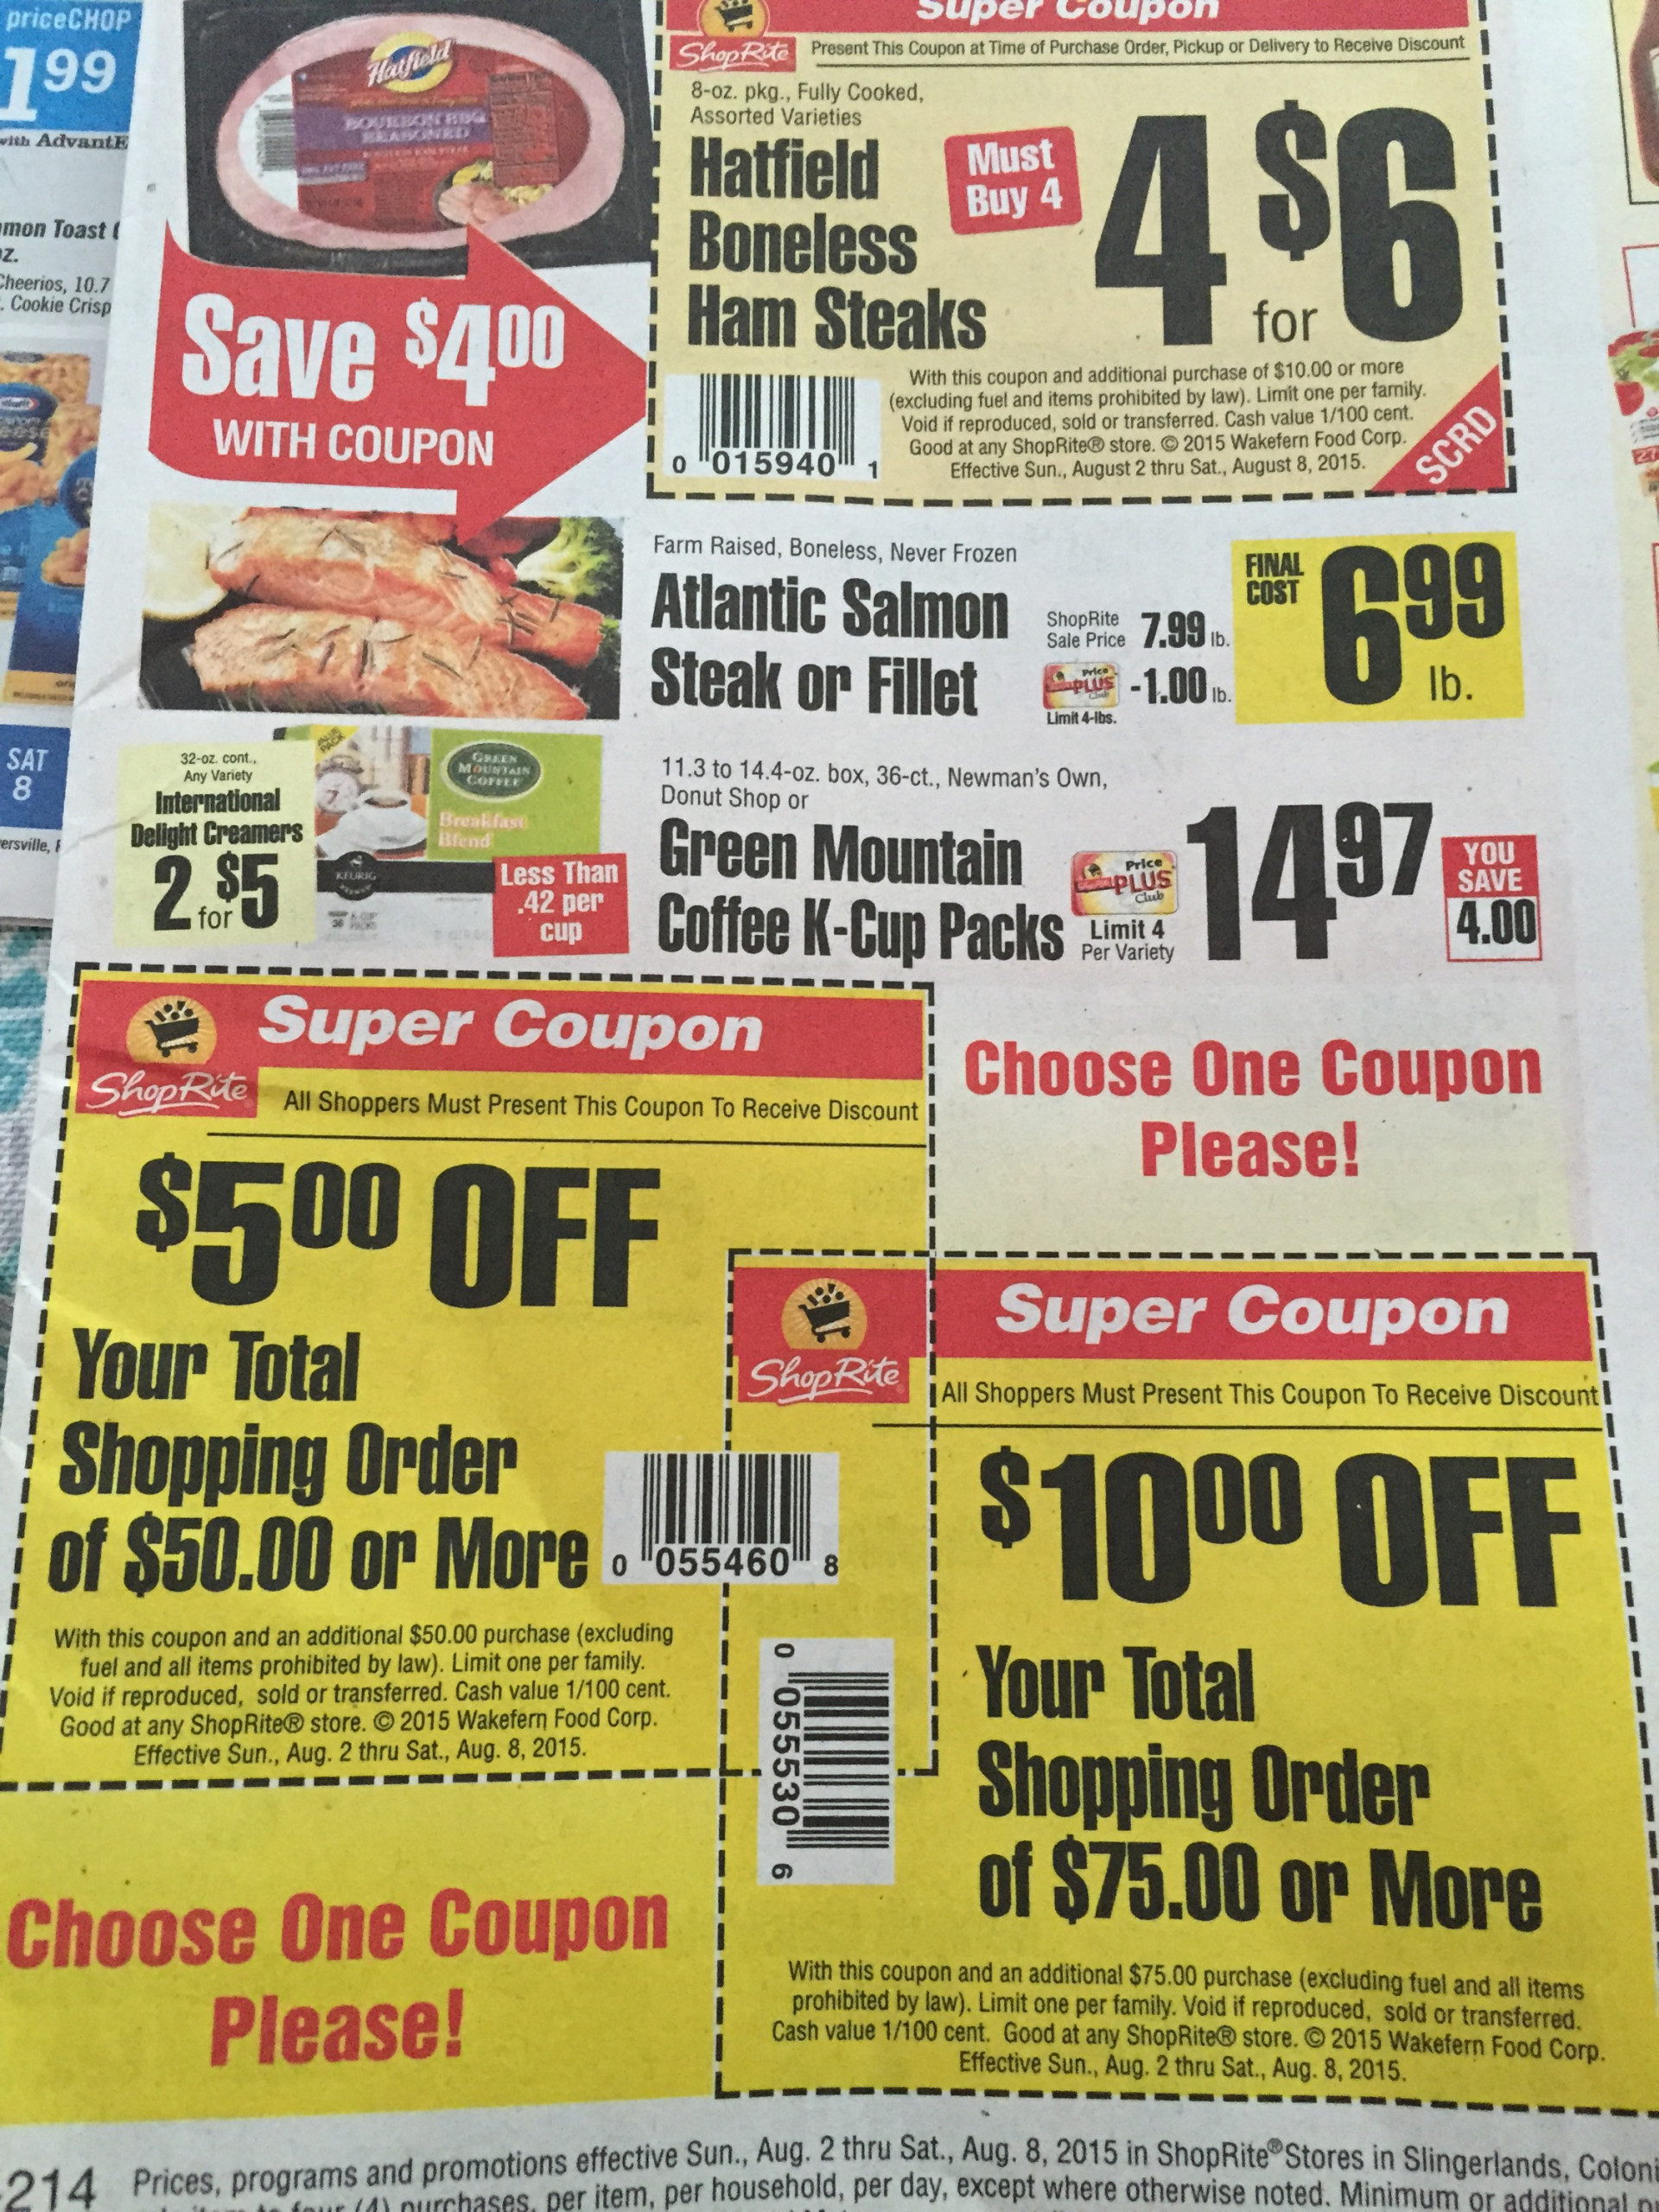  Blue Bunny And ShopRite Coupons